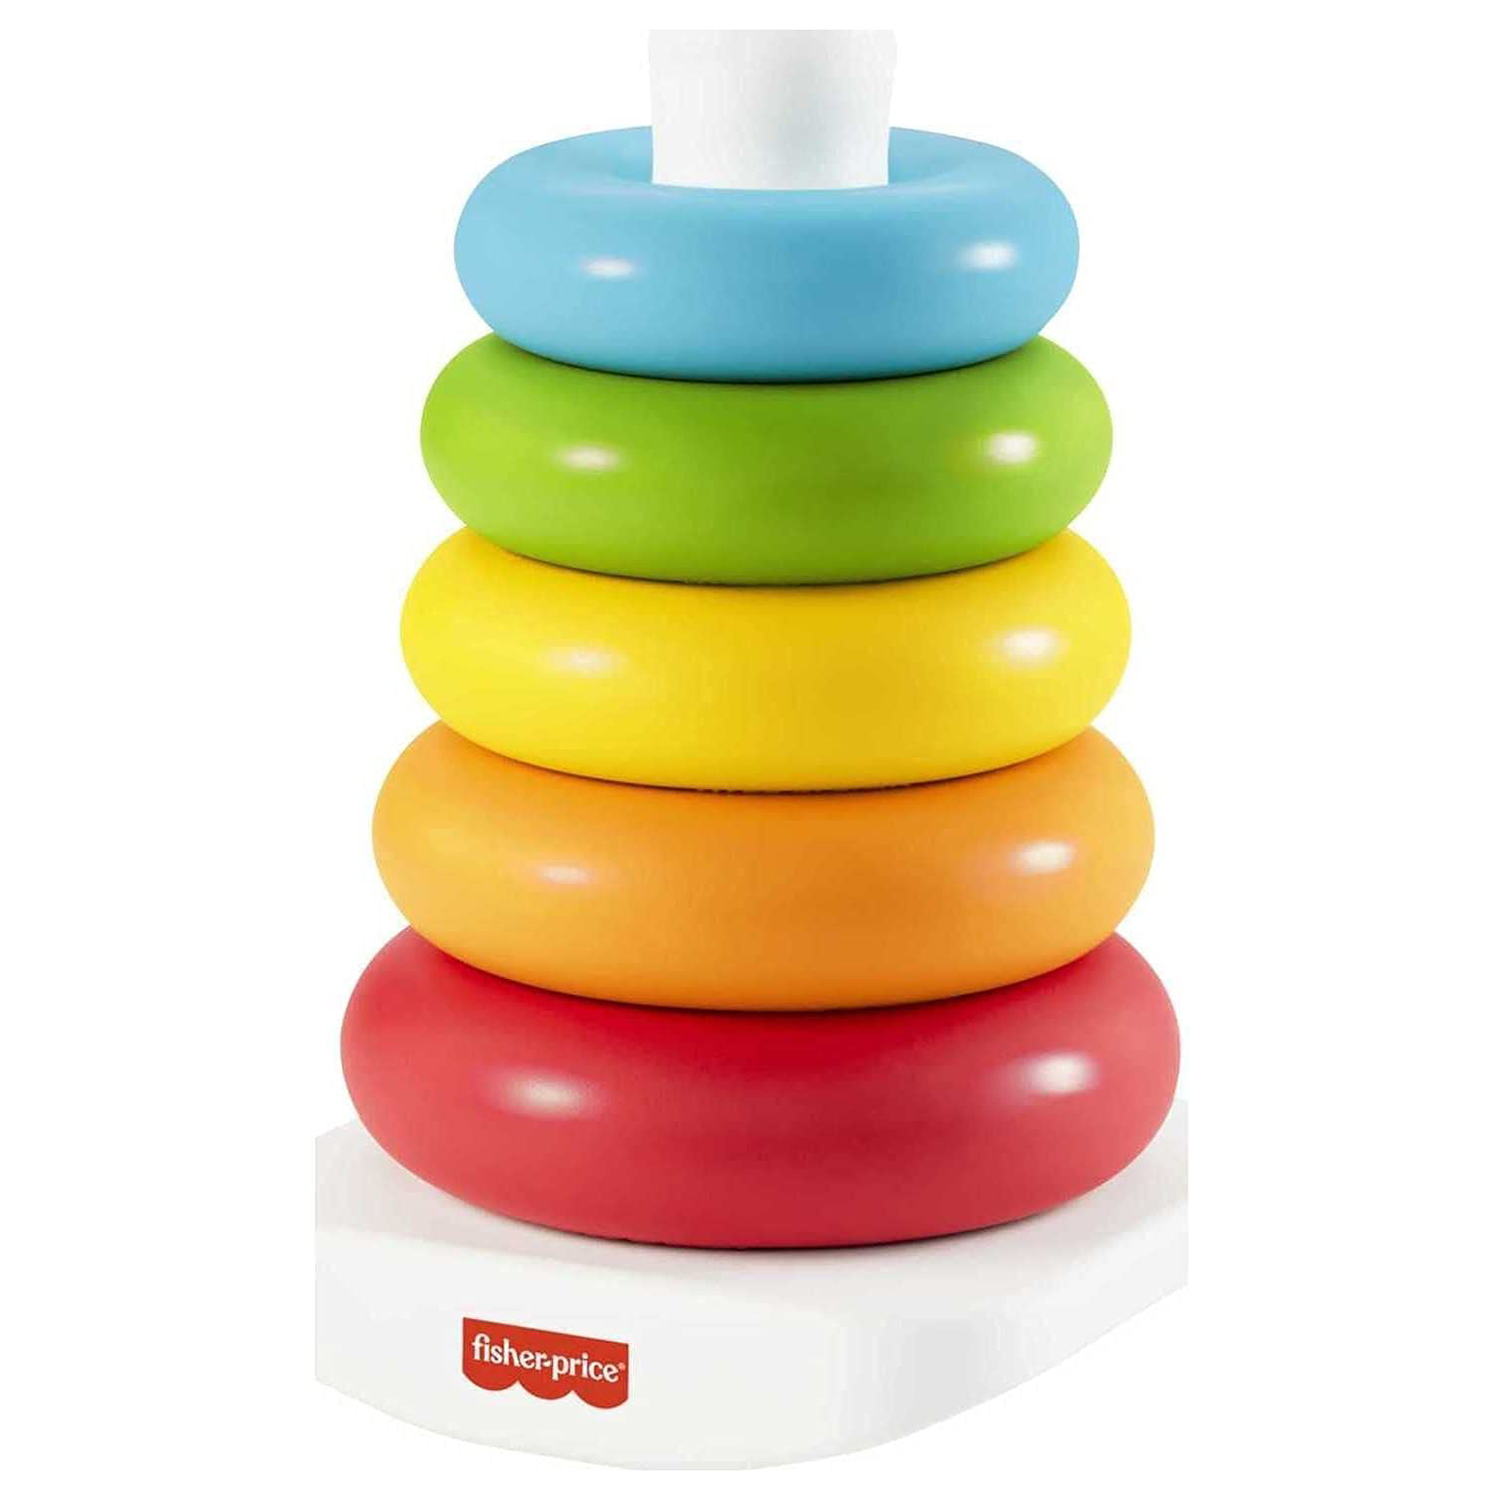 Best Budget Baby Toy: Fisher-Price Rock-a-Stack Classic